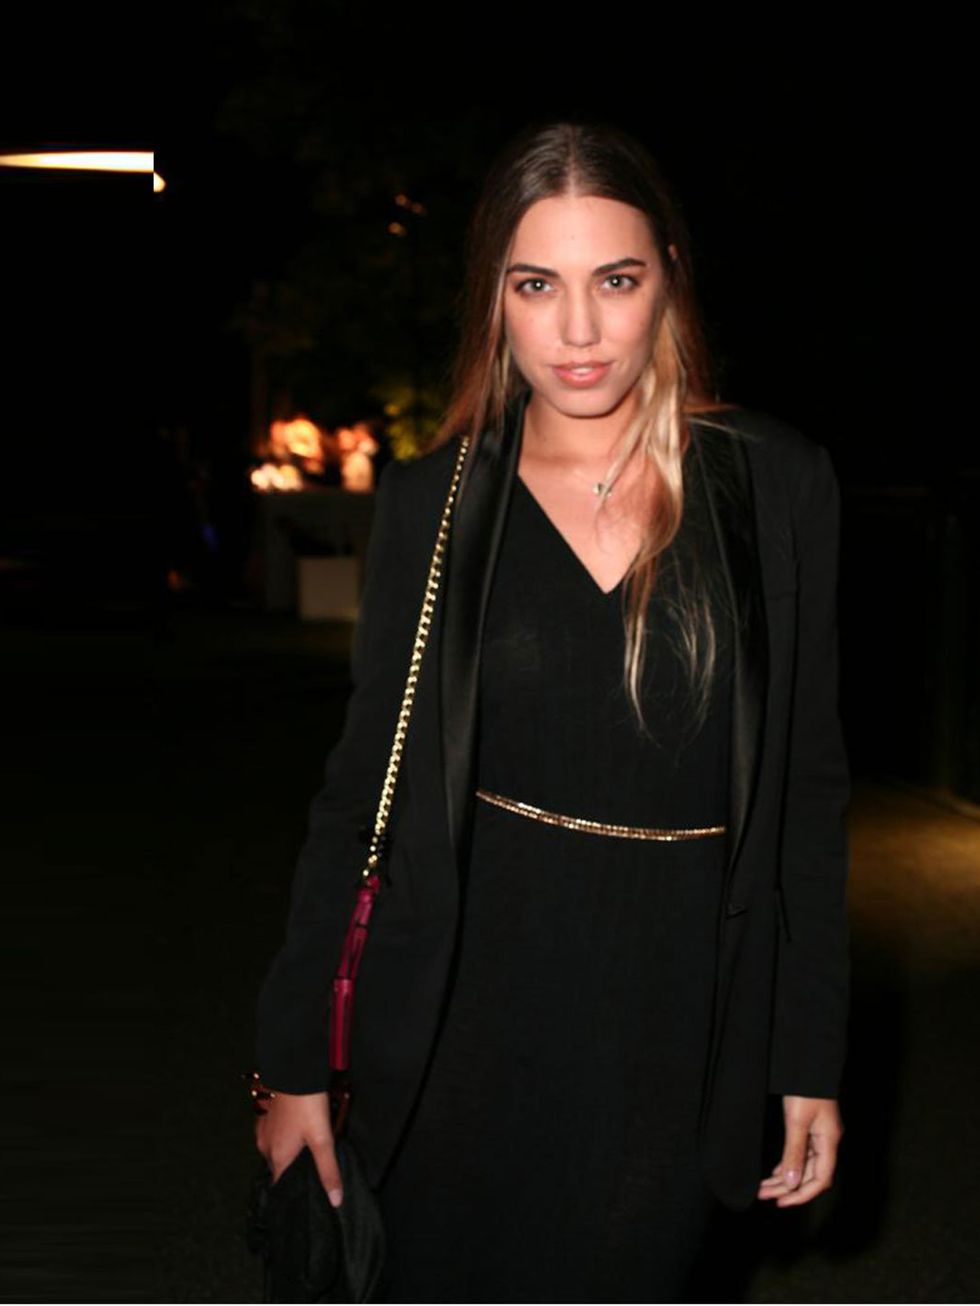 <p>Amber Le Bon at The Serpentine Gallery &amp; Diesel Future Contemporaries party at The Serpentine Gallery, London, September 2013.</p><p><a href="http://www.elleuk.com/catwalk">All the latest SS14 shows</a></p>